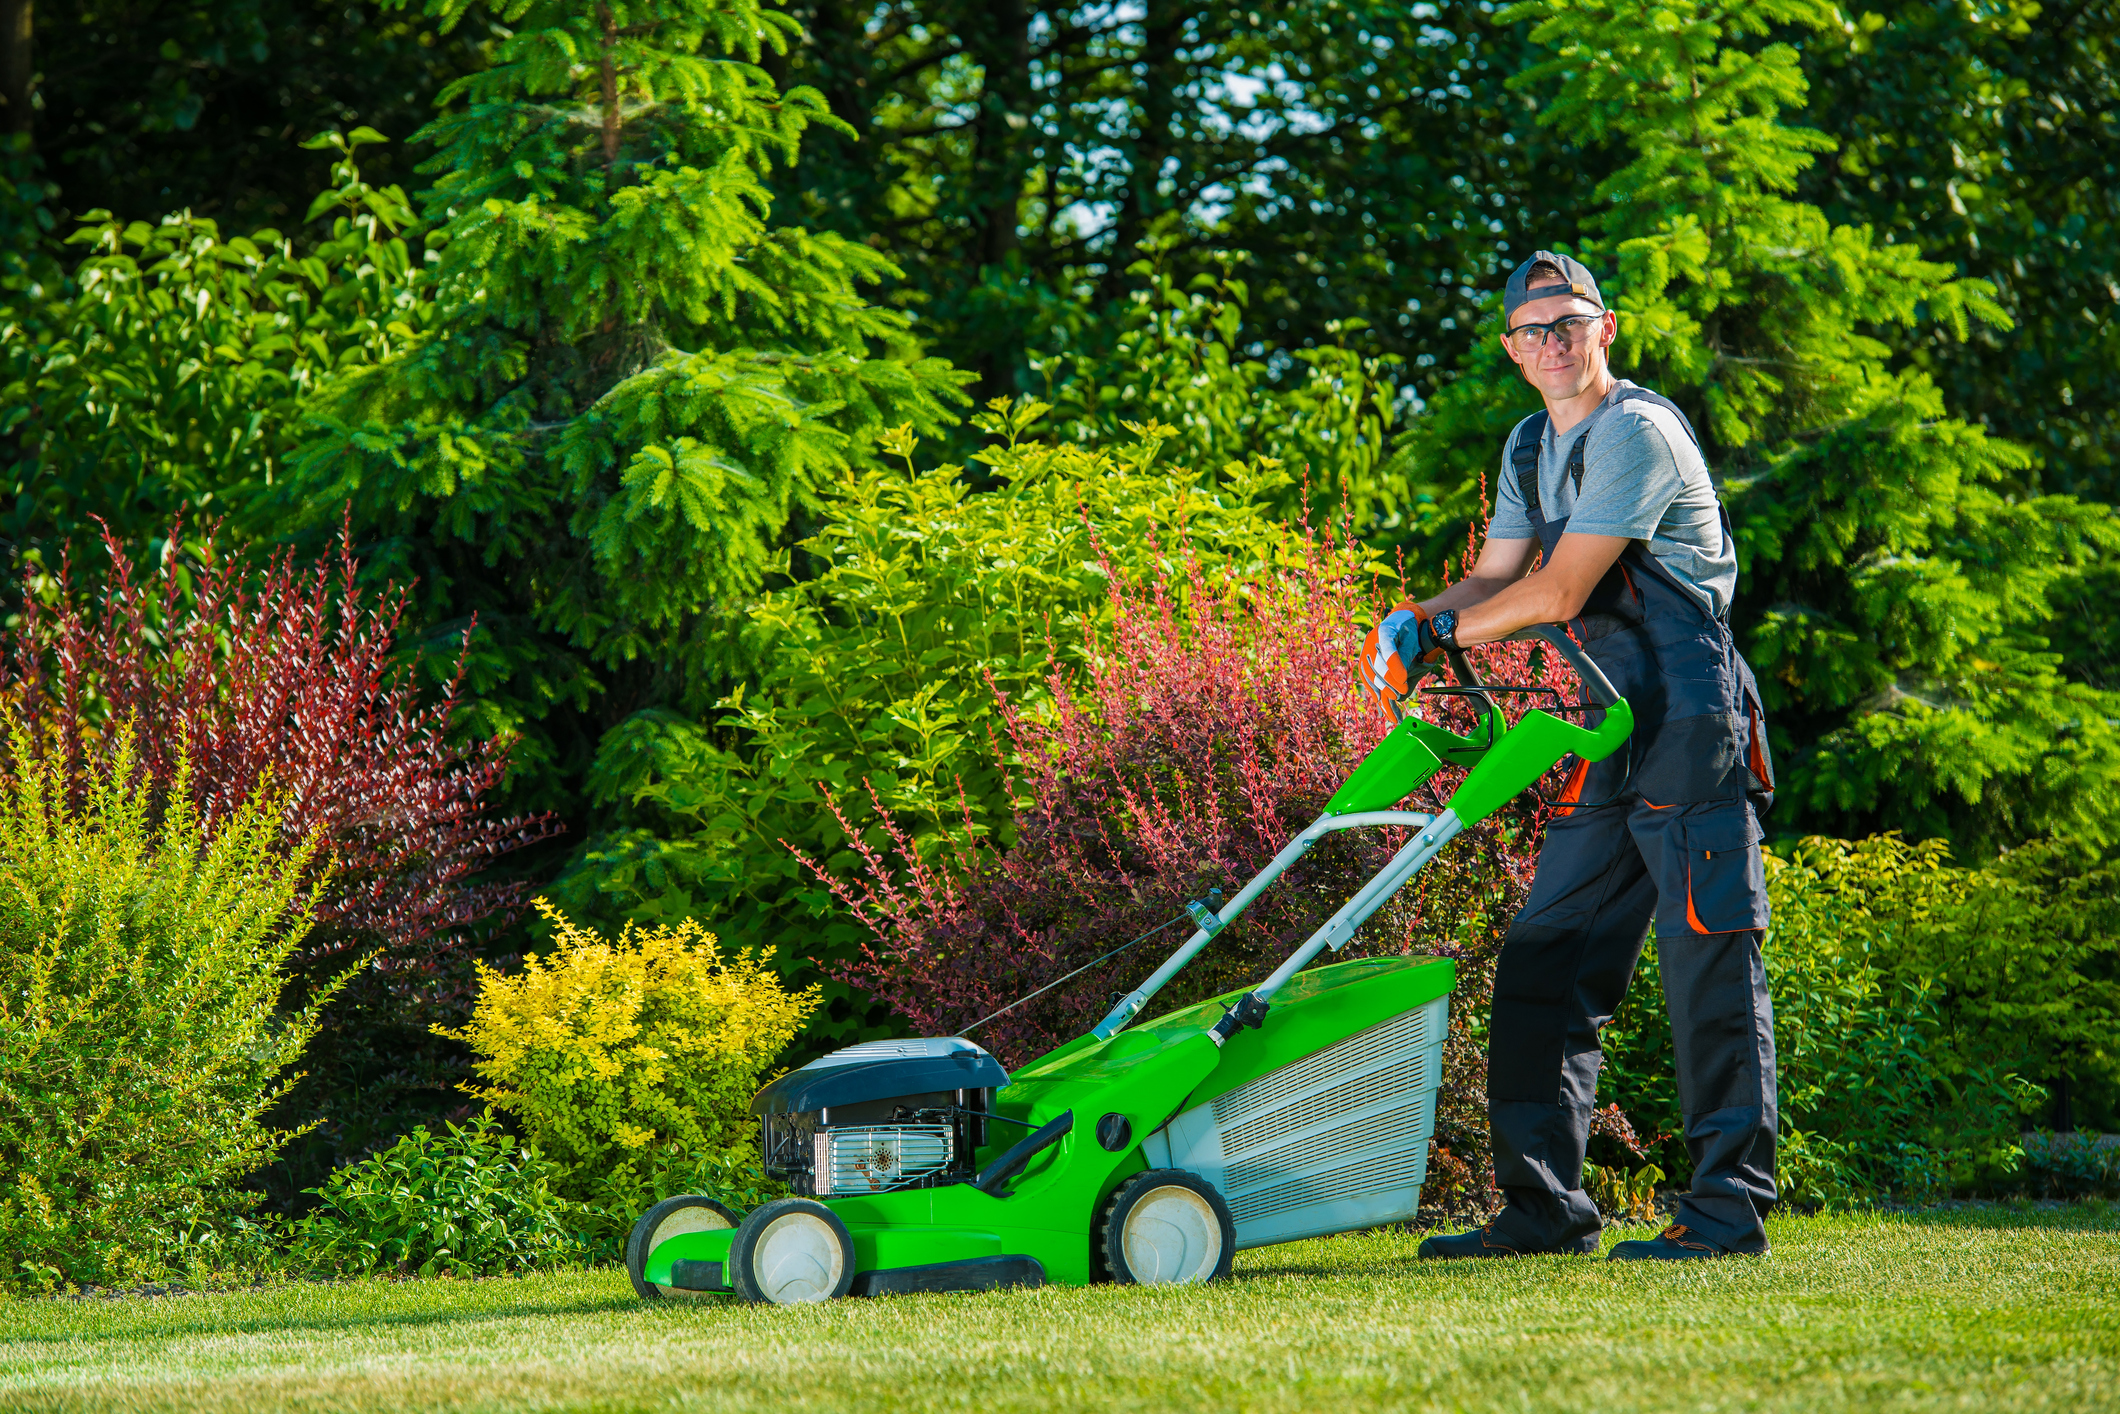 Landscapers: What you need to know to keep yourself and your workers safe.  | Merchants Insurance Group - Earning Your Business Every Day